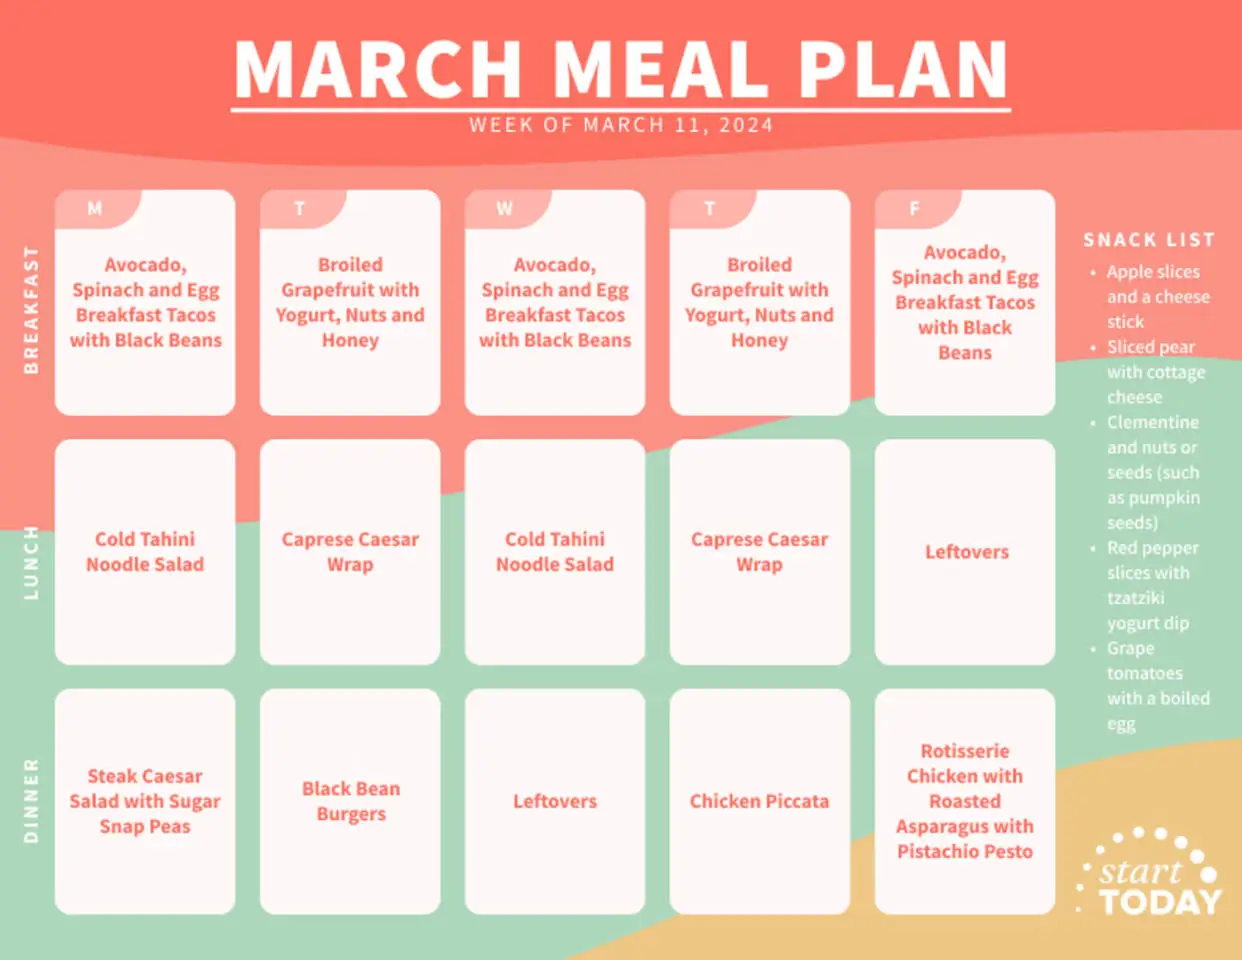 Healthy Meal Plan for Week of March 11, 2024